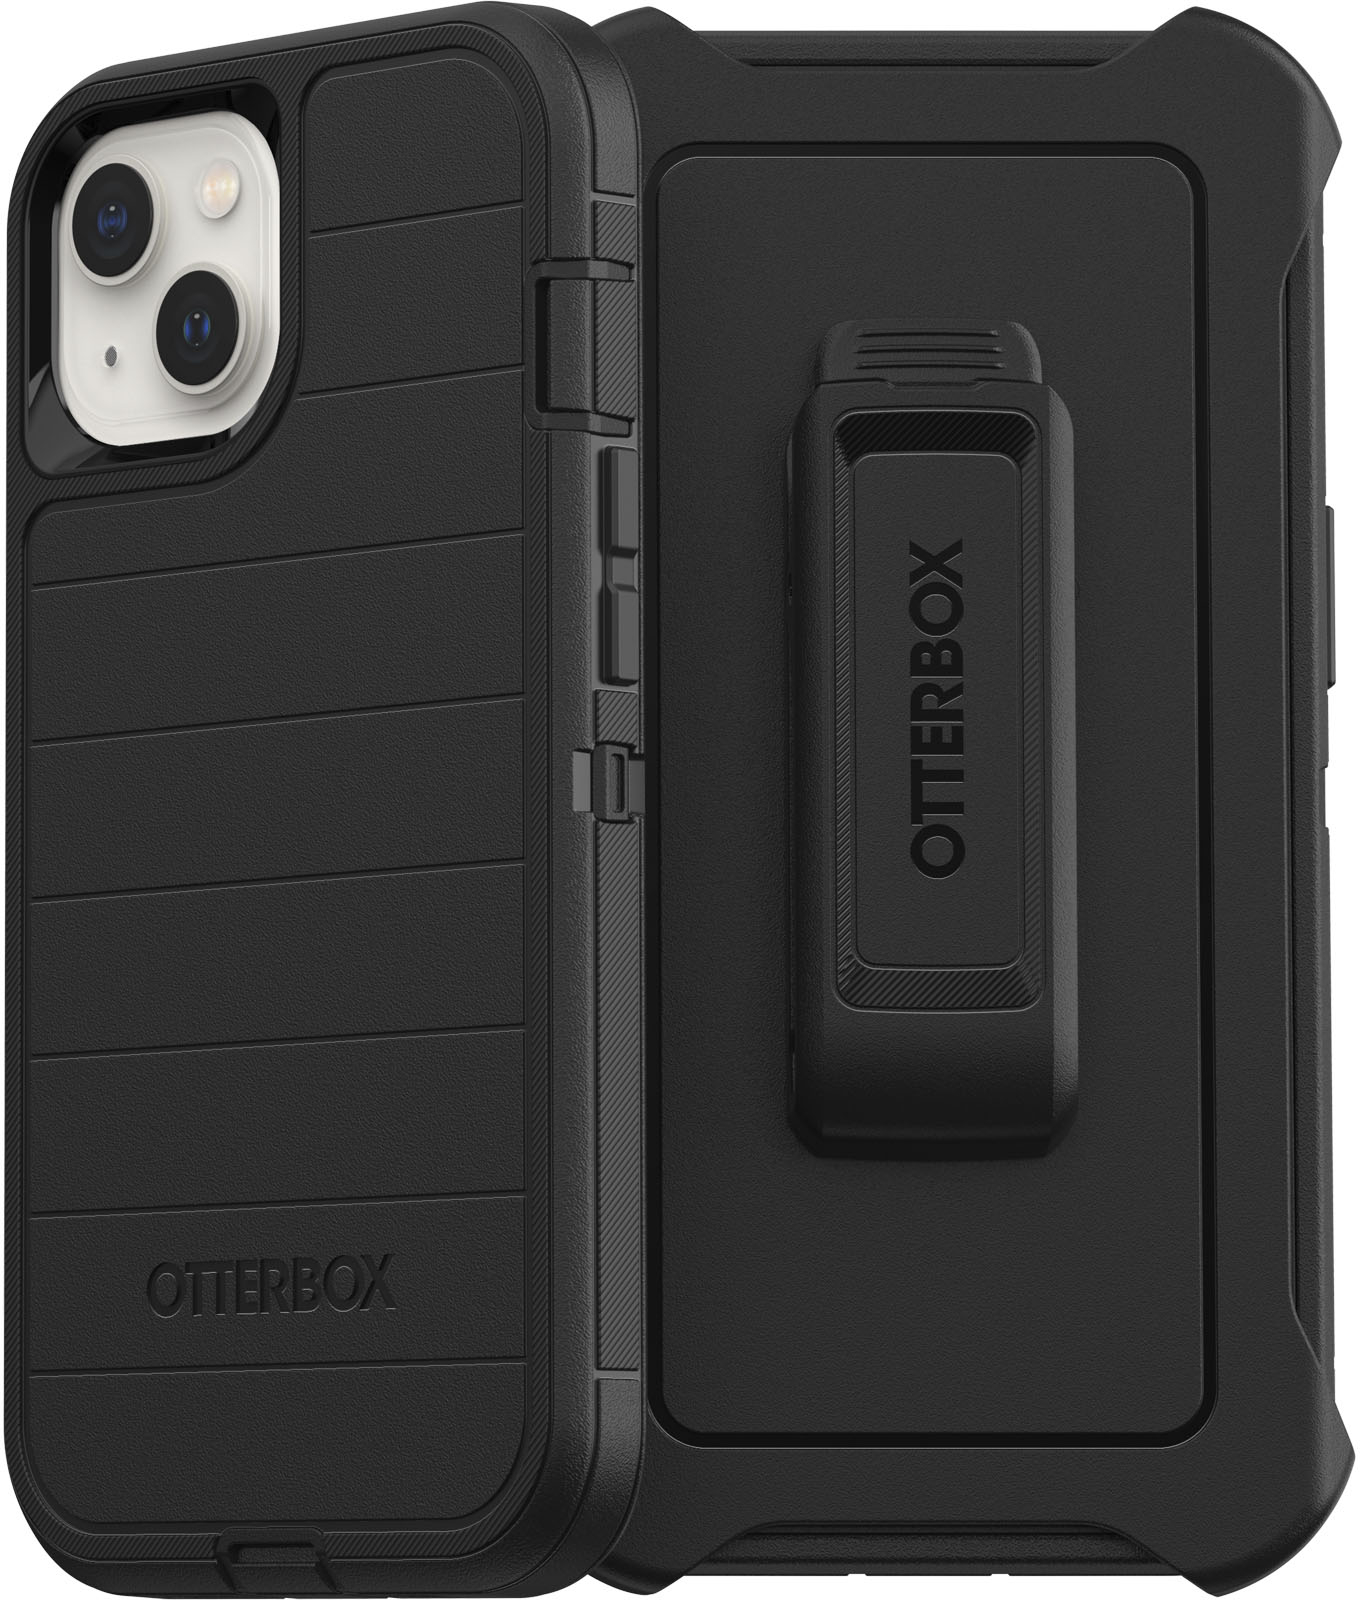 Angle View: OtterBox - Defender Series Pro Hard Shell for Apple iPhone 13 - Black